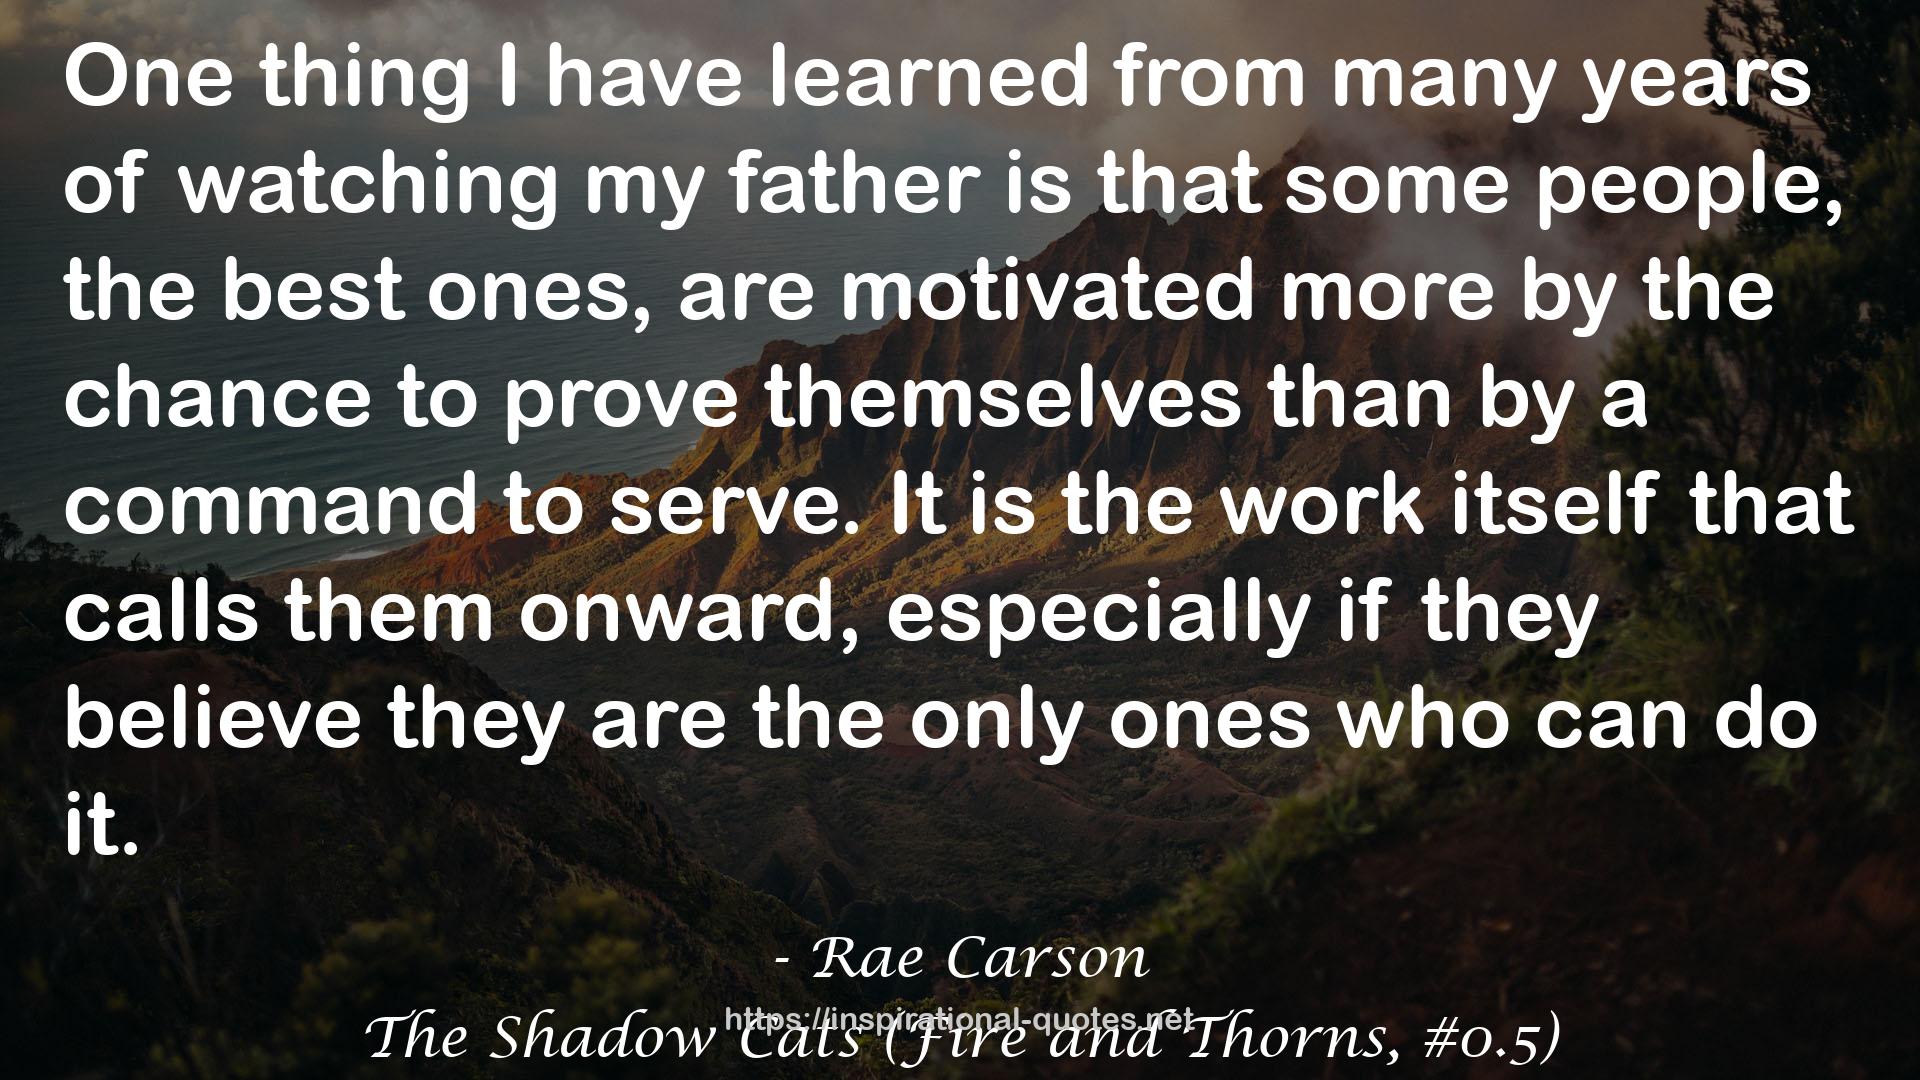 The Shadow Cats (Fire and Thorns, #0.5) QUOTES